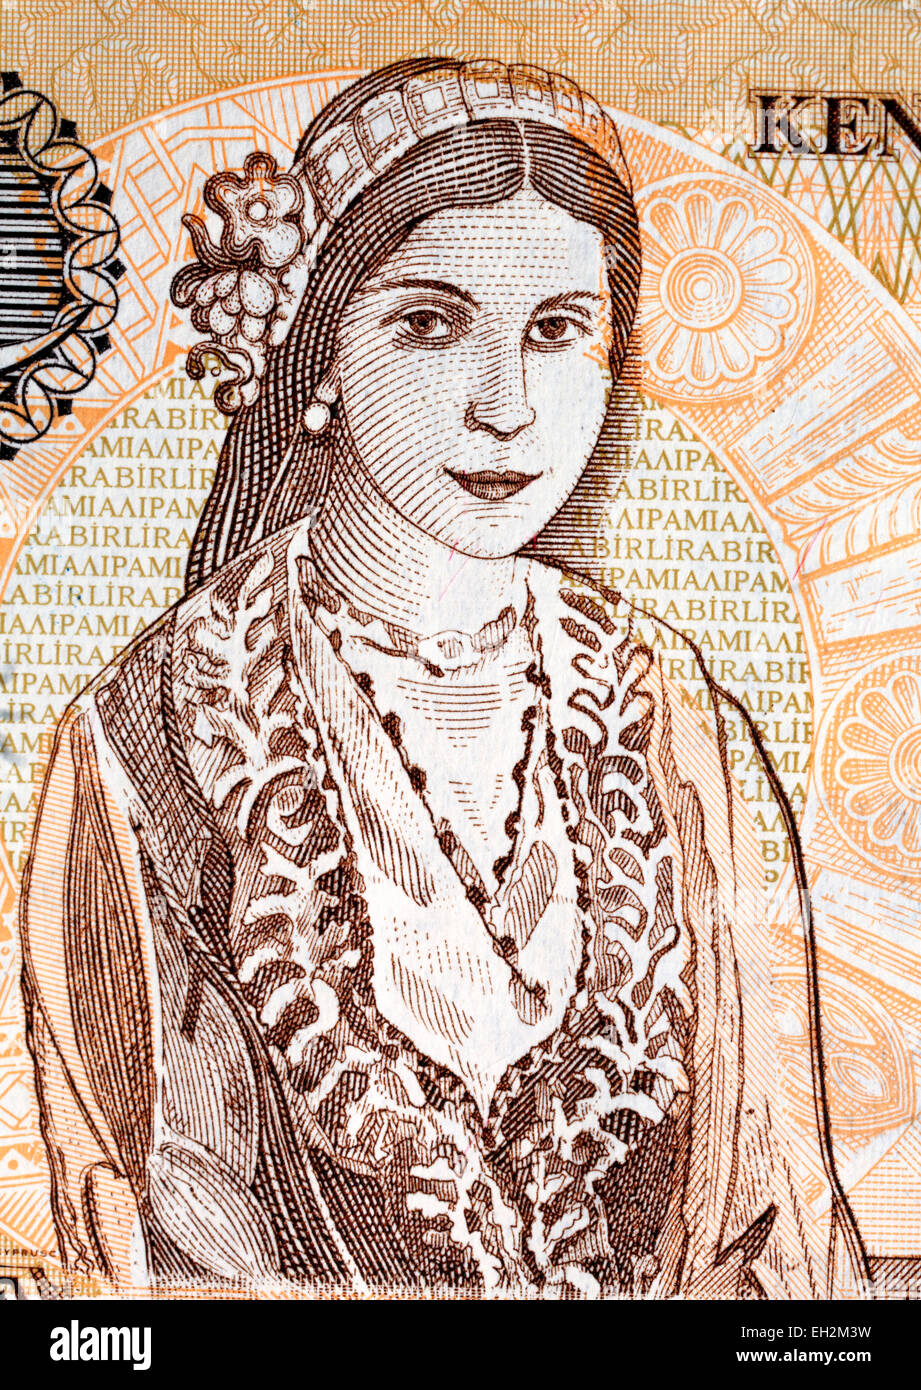 Cypriot girl from 1 pound banknote, Cyprus, 2004 Stock Photo